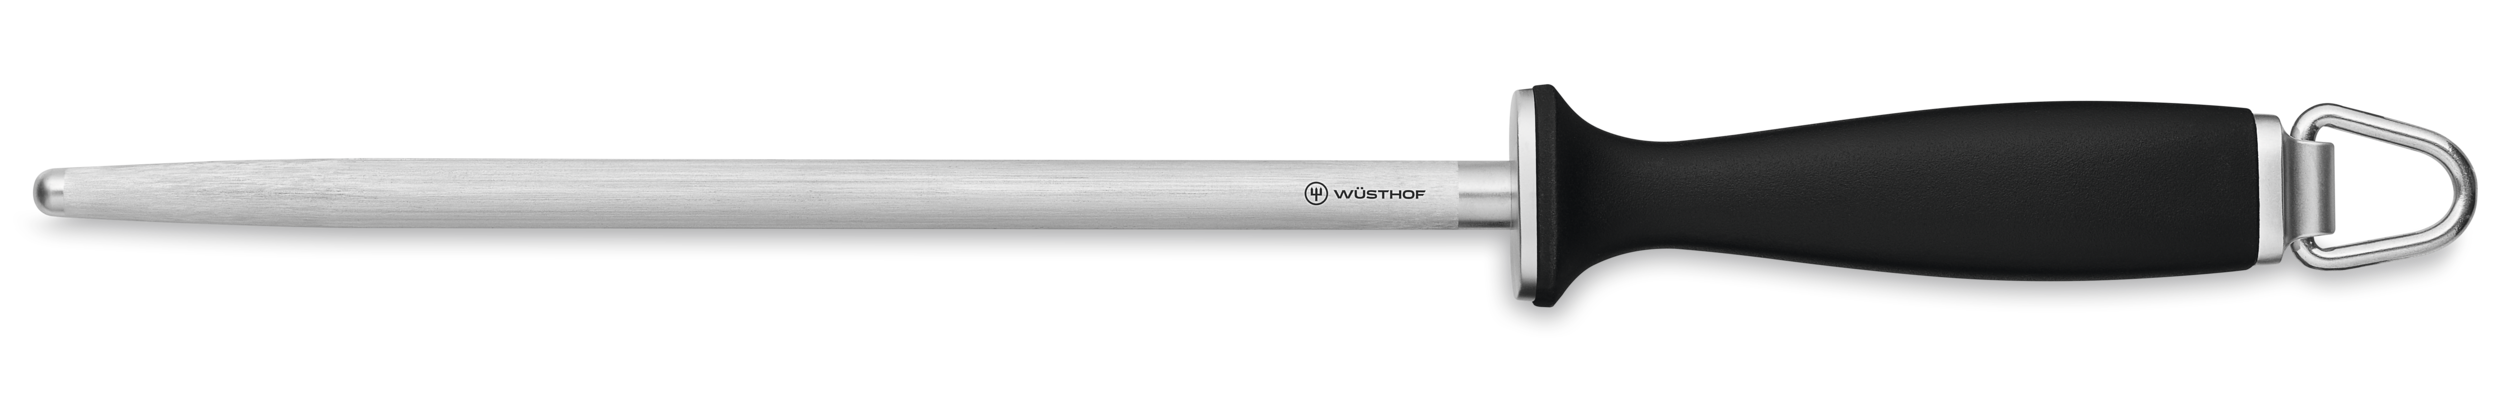 Wusthof Germany - Classic - 26cm. stainless steel sharpener - 3049700526 -  knife accessories